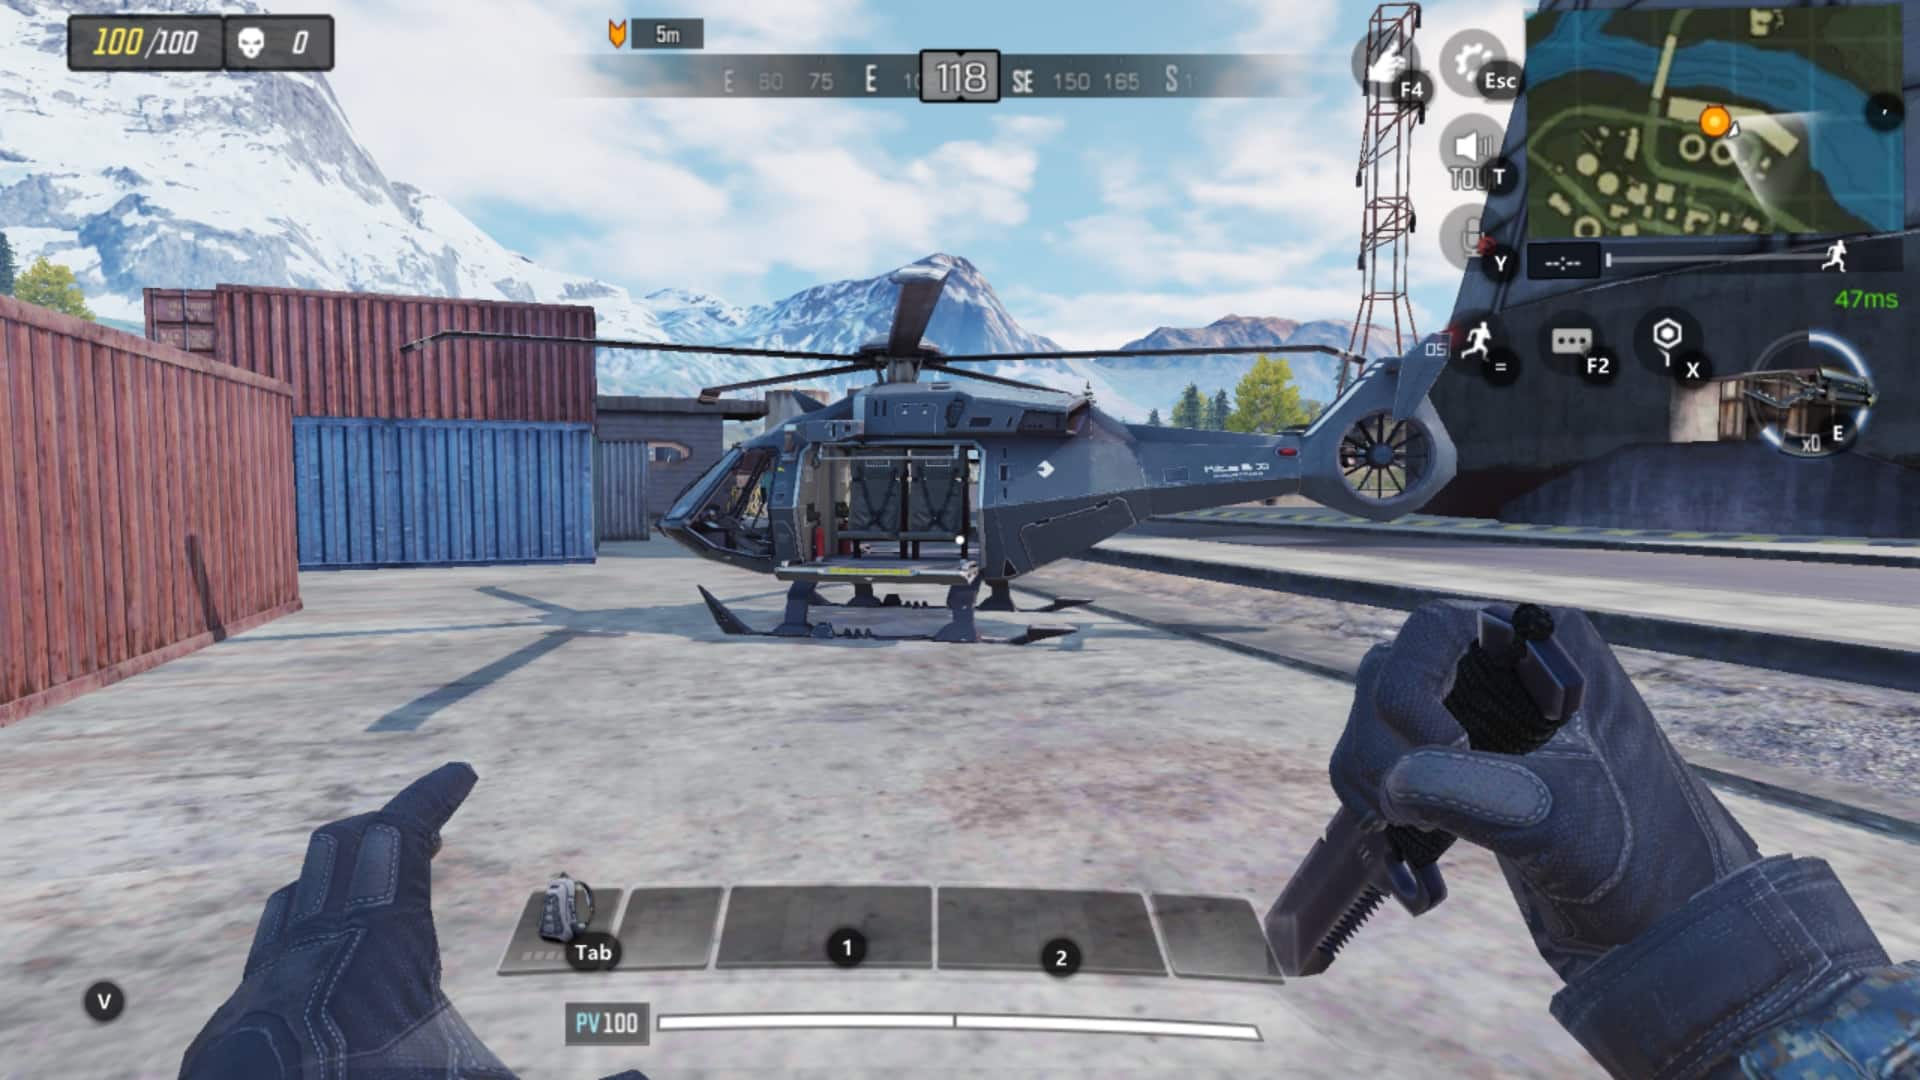 vignette-call-of-duty-mobile-emplacements-helicopteres-battle-royale-carte-isolated-saison-1